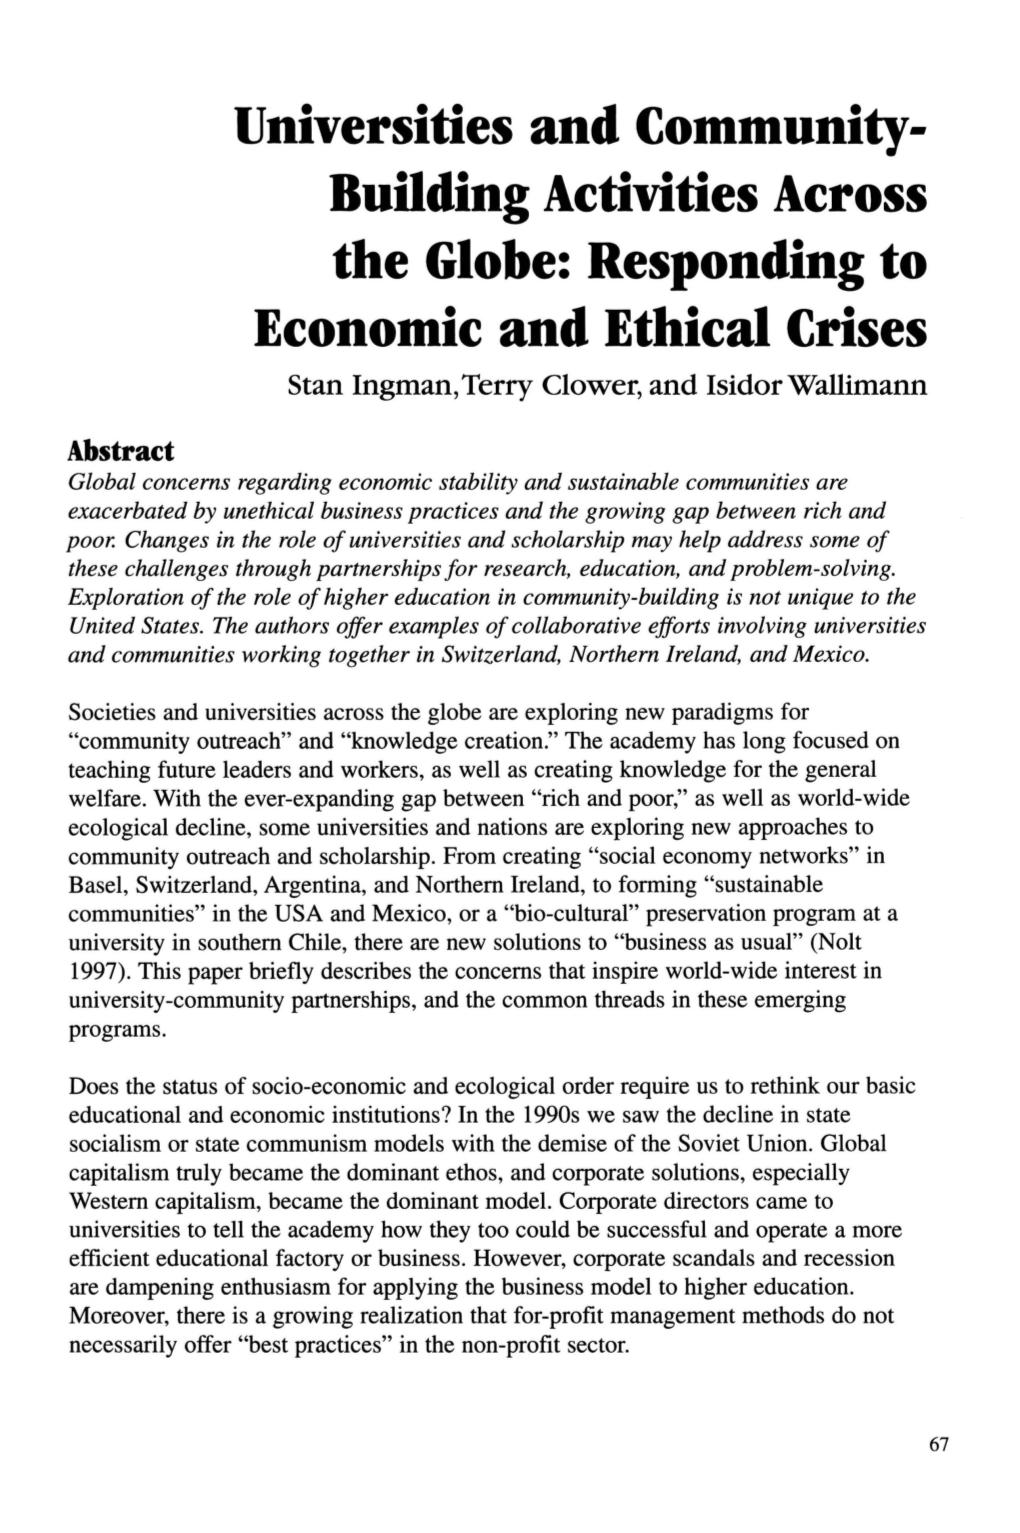 Responding to Economic and Ethical Crises Stan Ingman, Terry Clower, and Isidor Wallimann